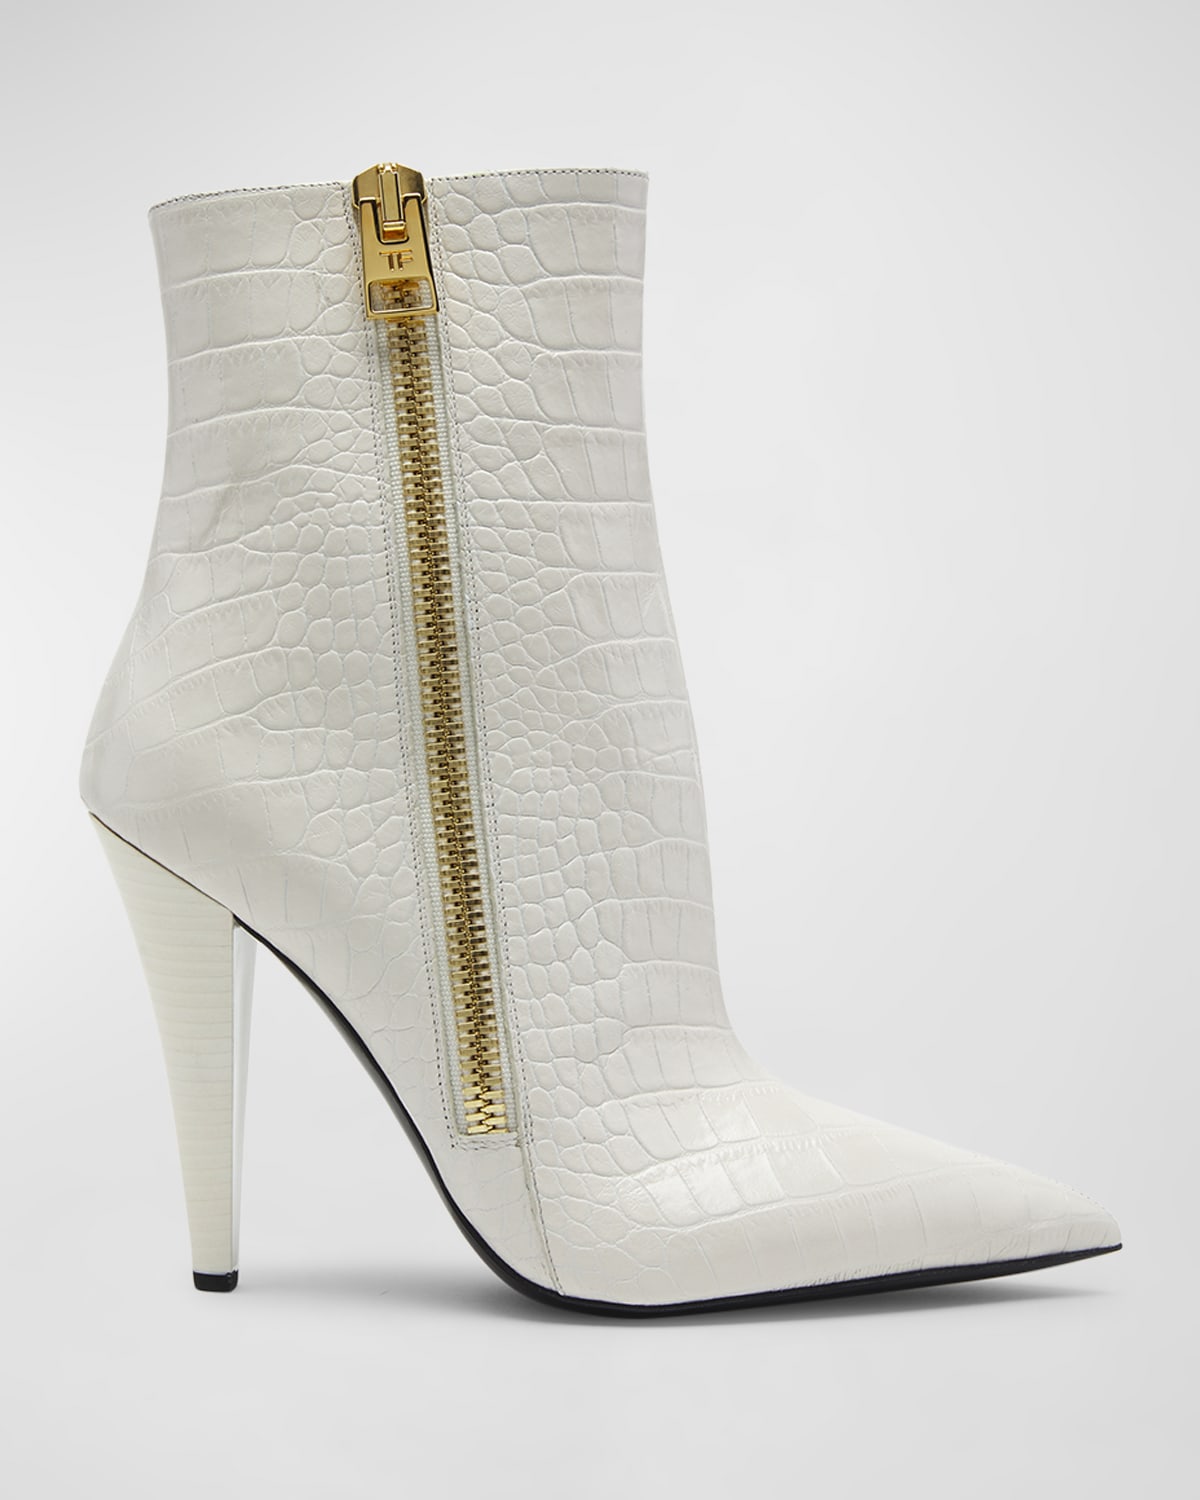 TOM FORD CROCO ZIP STILETTO ANKLE BOOTS